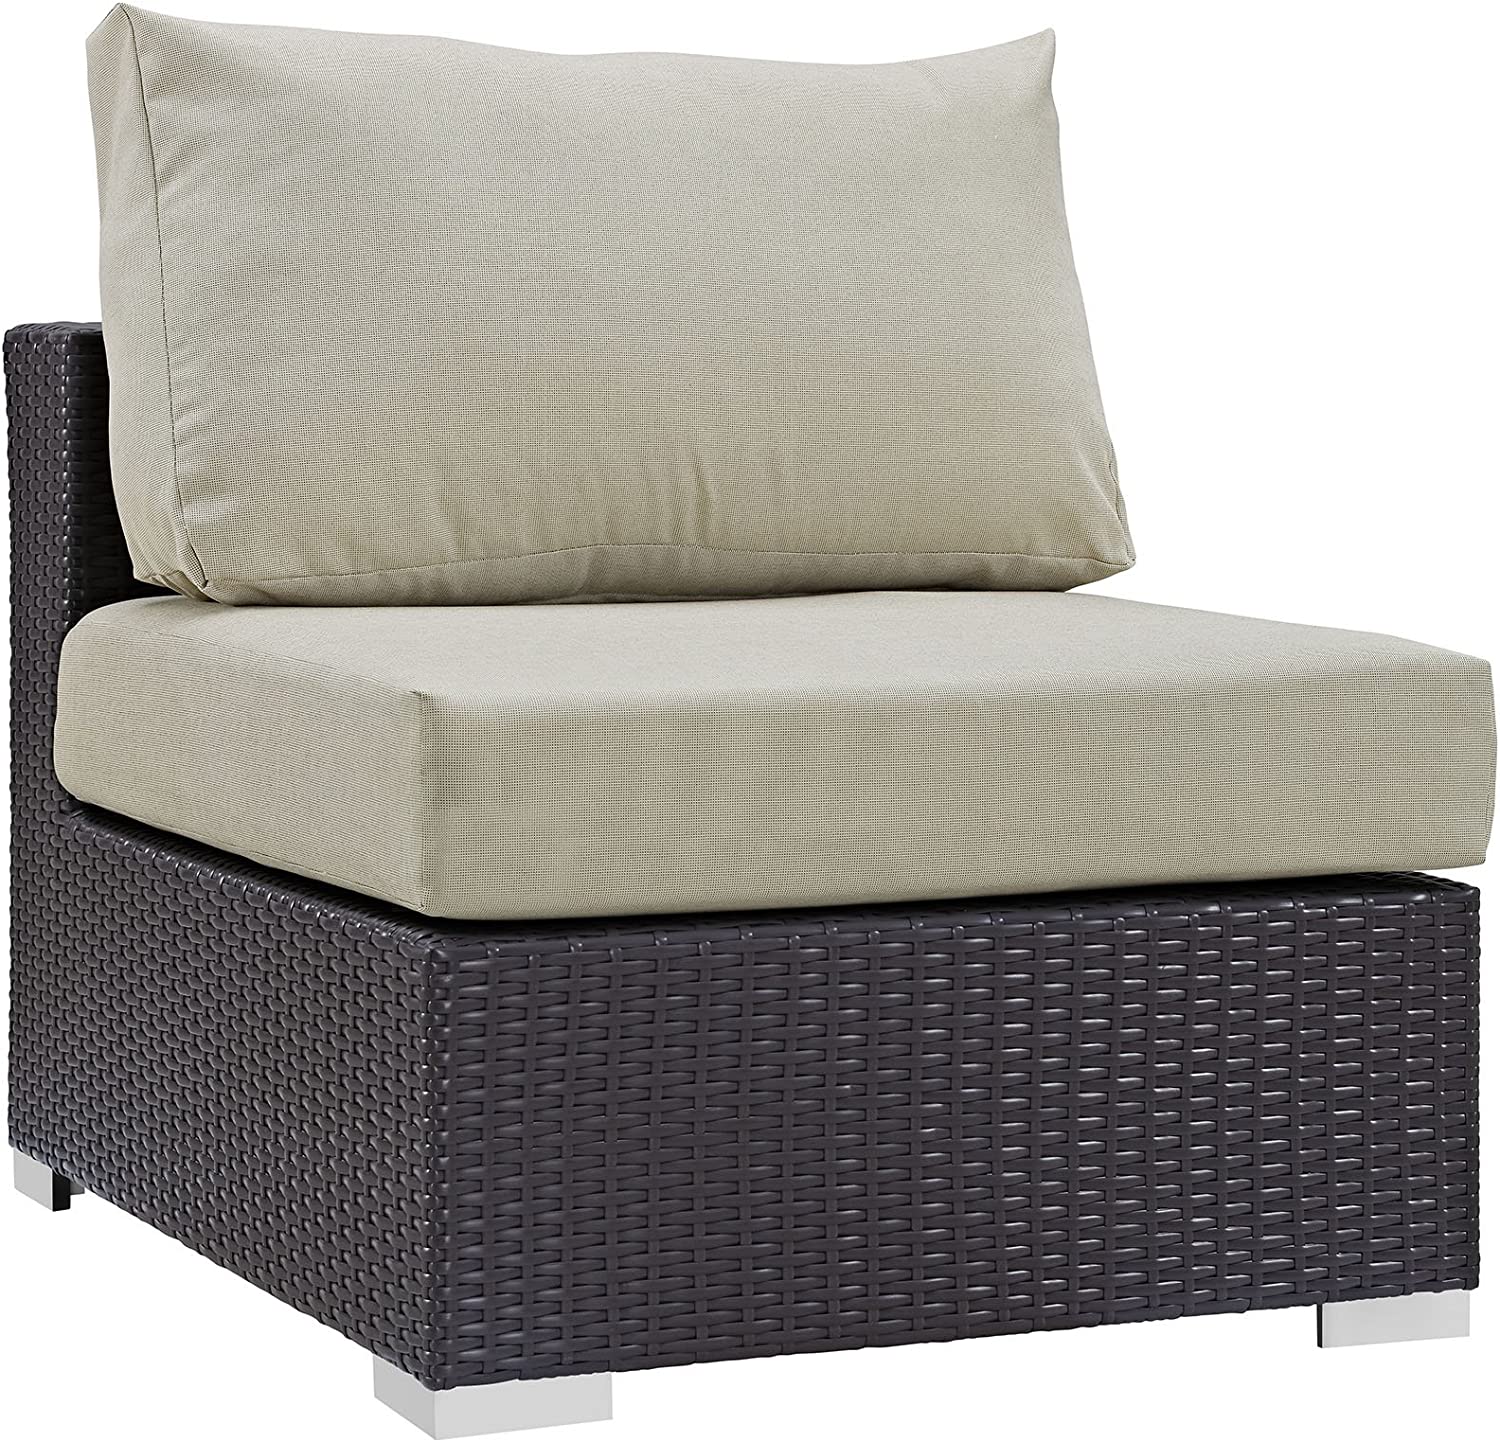 Modway Convene Wicker Rattan Outdoor Patio Sectional Sofa Armless Chair in Espresso Beige